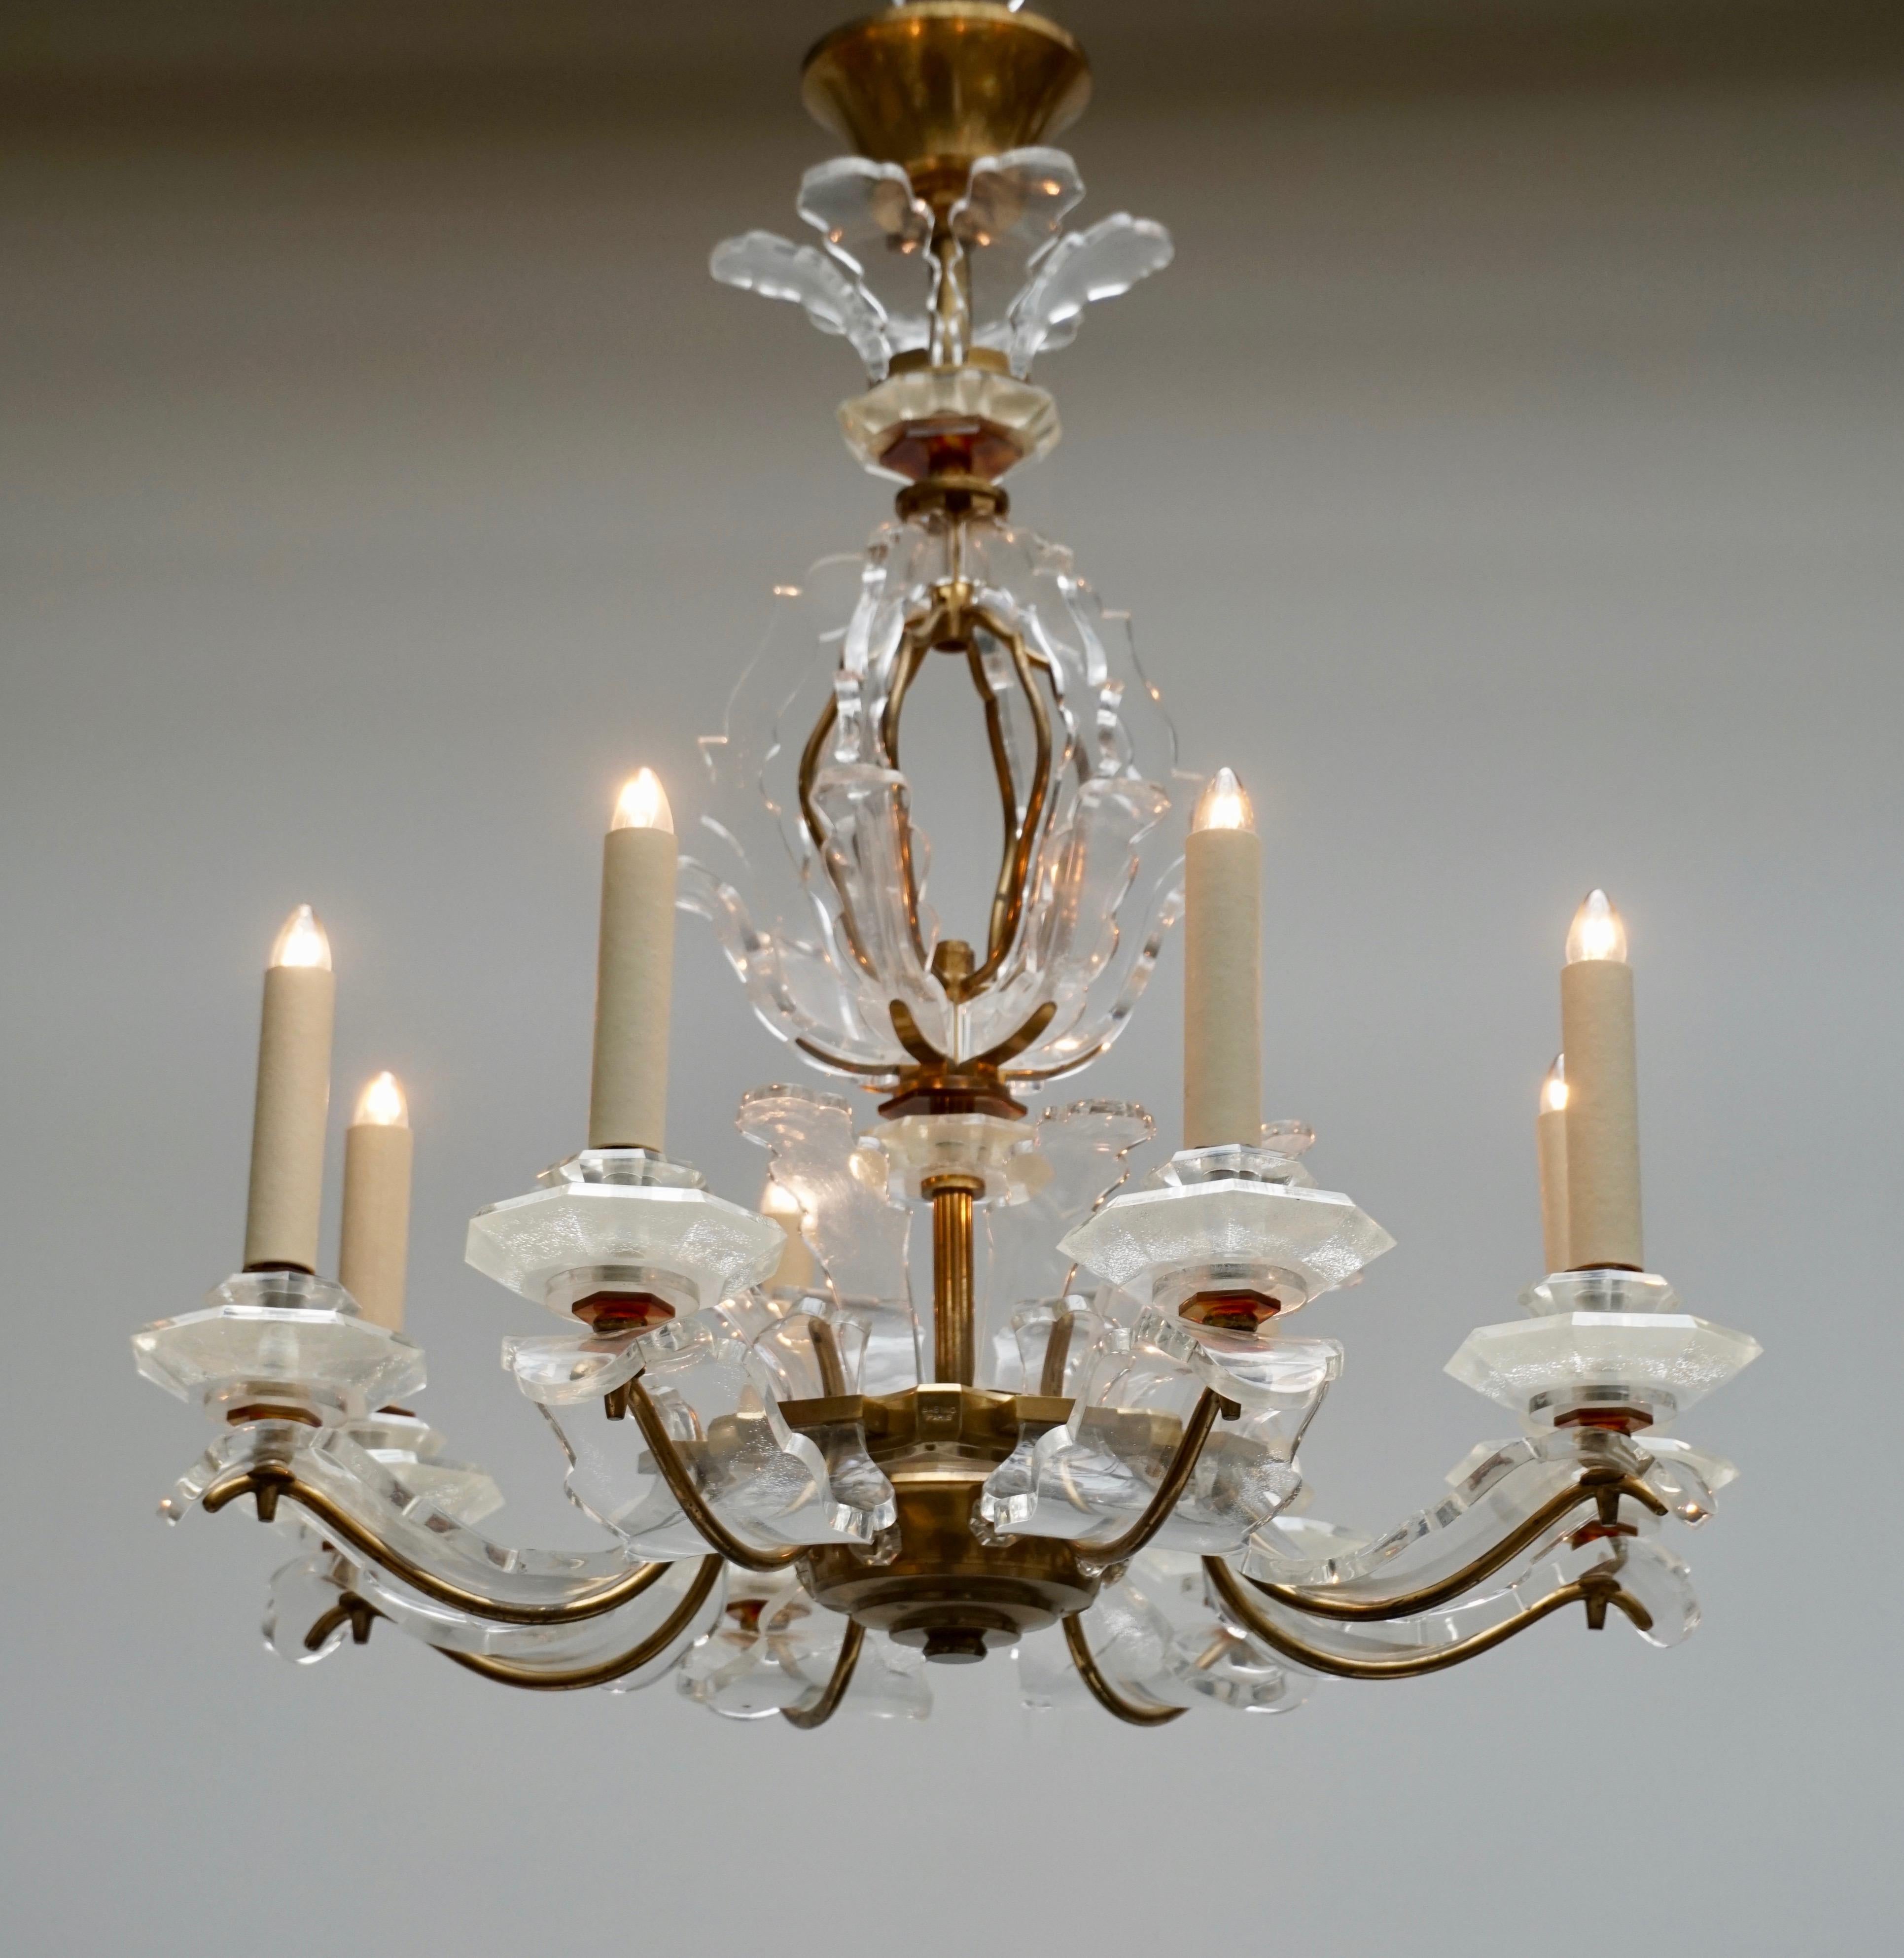 Unique Art Deco chandelier made in Lucite and signed by Sabino (Italy 1878 - Paris 1961)
Probably a prototype because this is the only Lucite chandelier made by Sabino.
Eight E14 light bulbs / good working condition/ New European